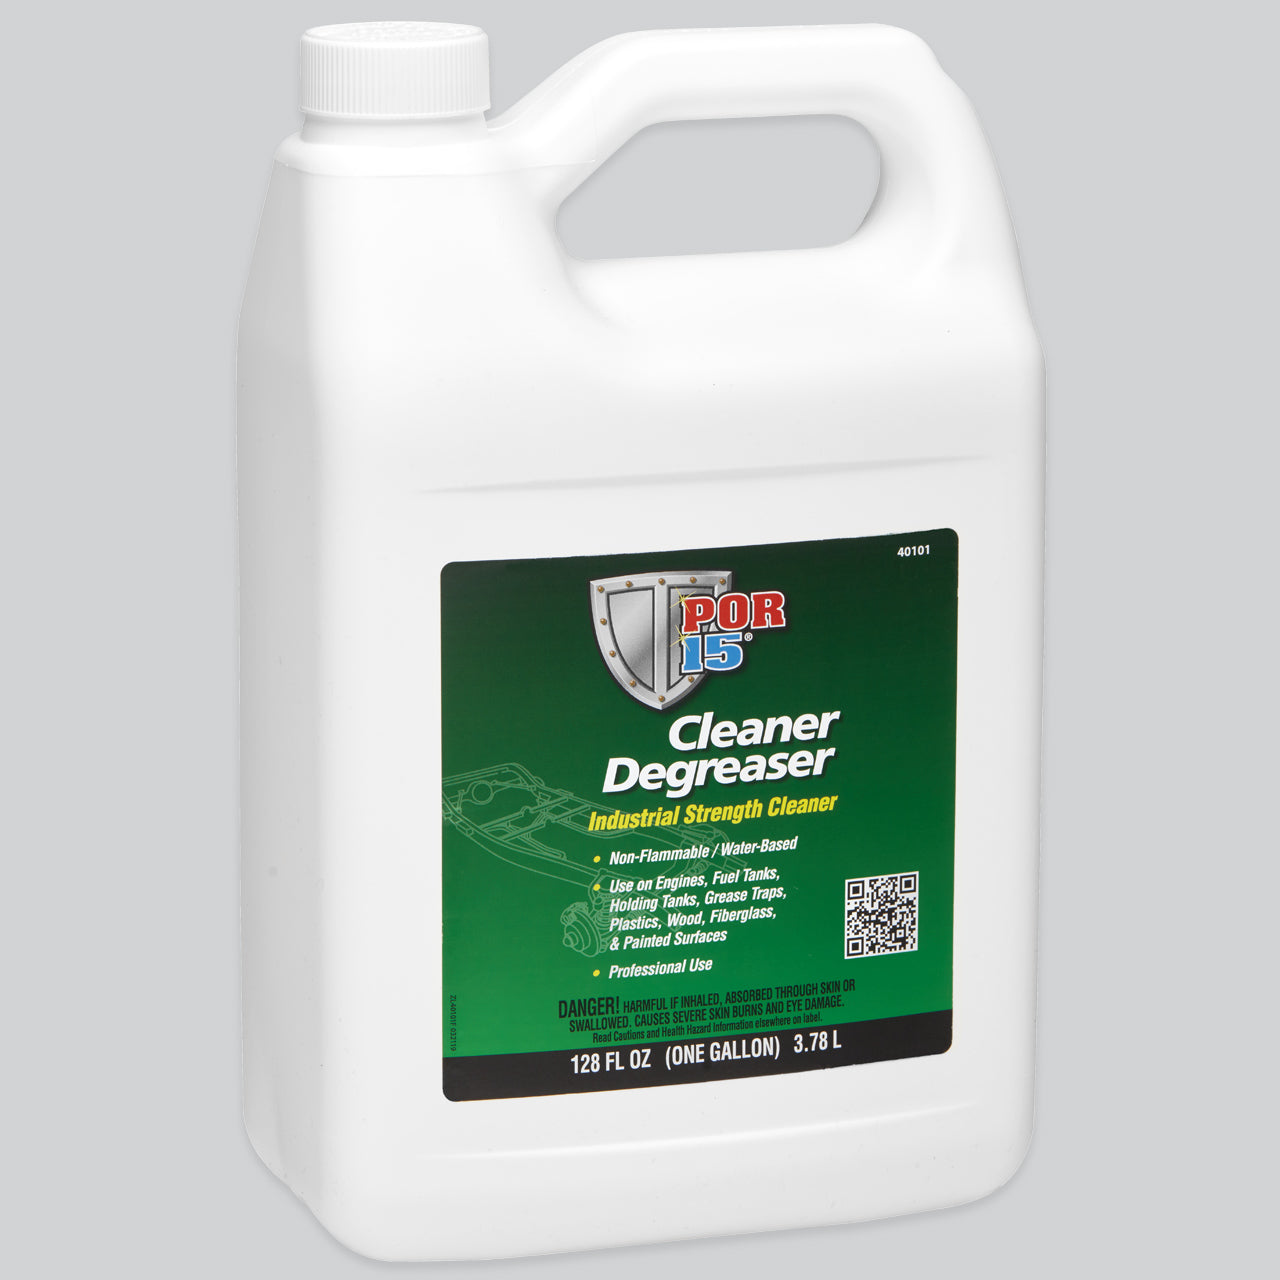 Best Engine Degreaser In 2023 - Top 10 Engine Degreasers Review 